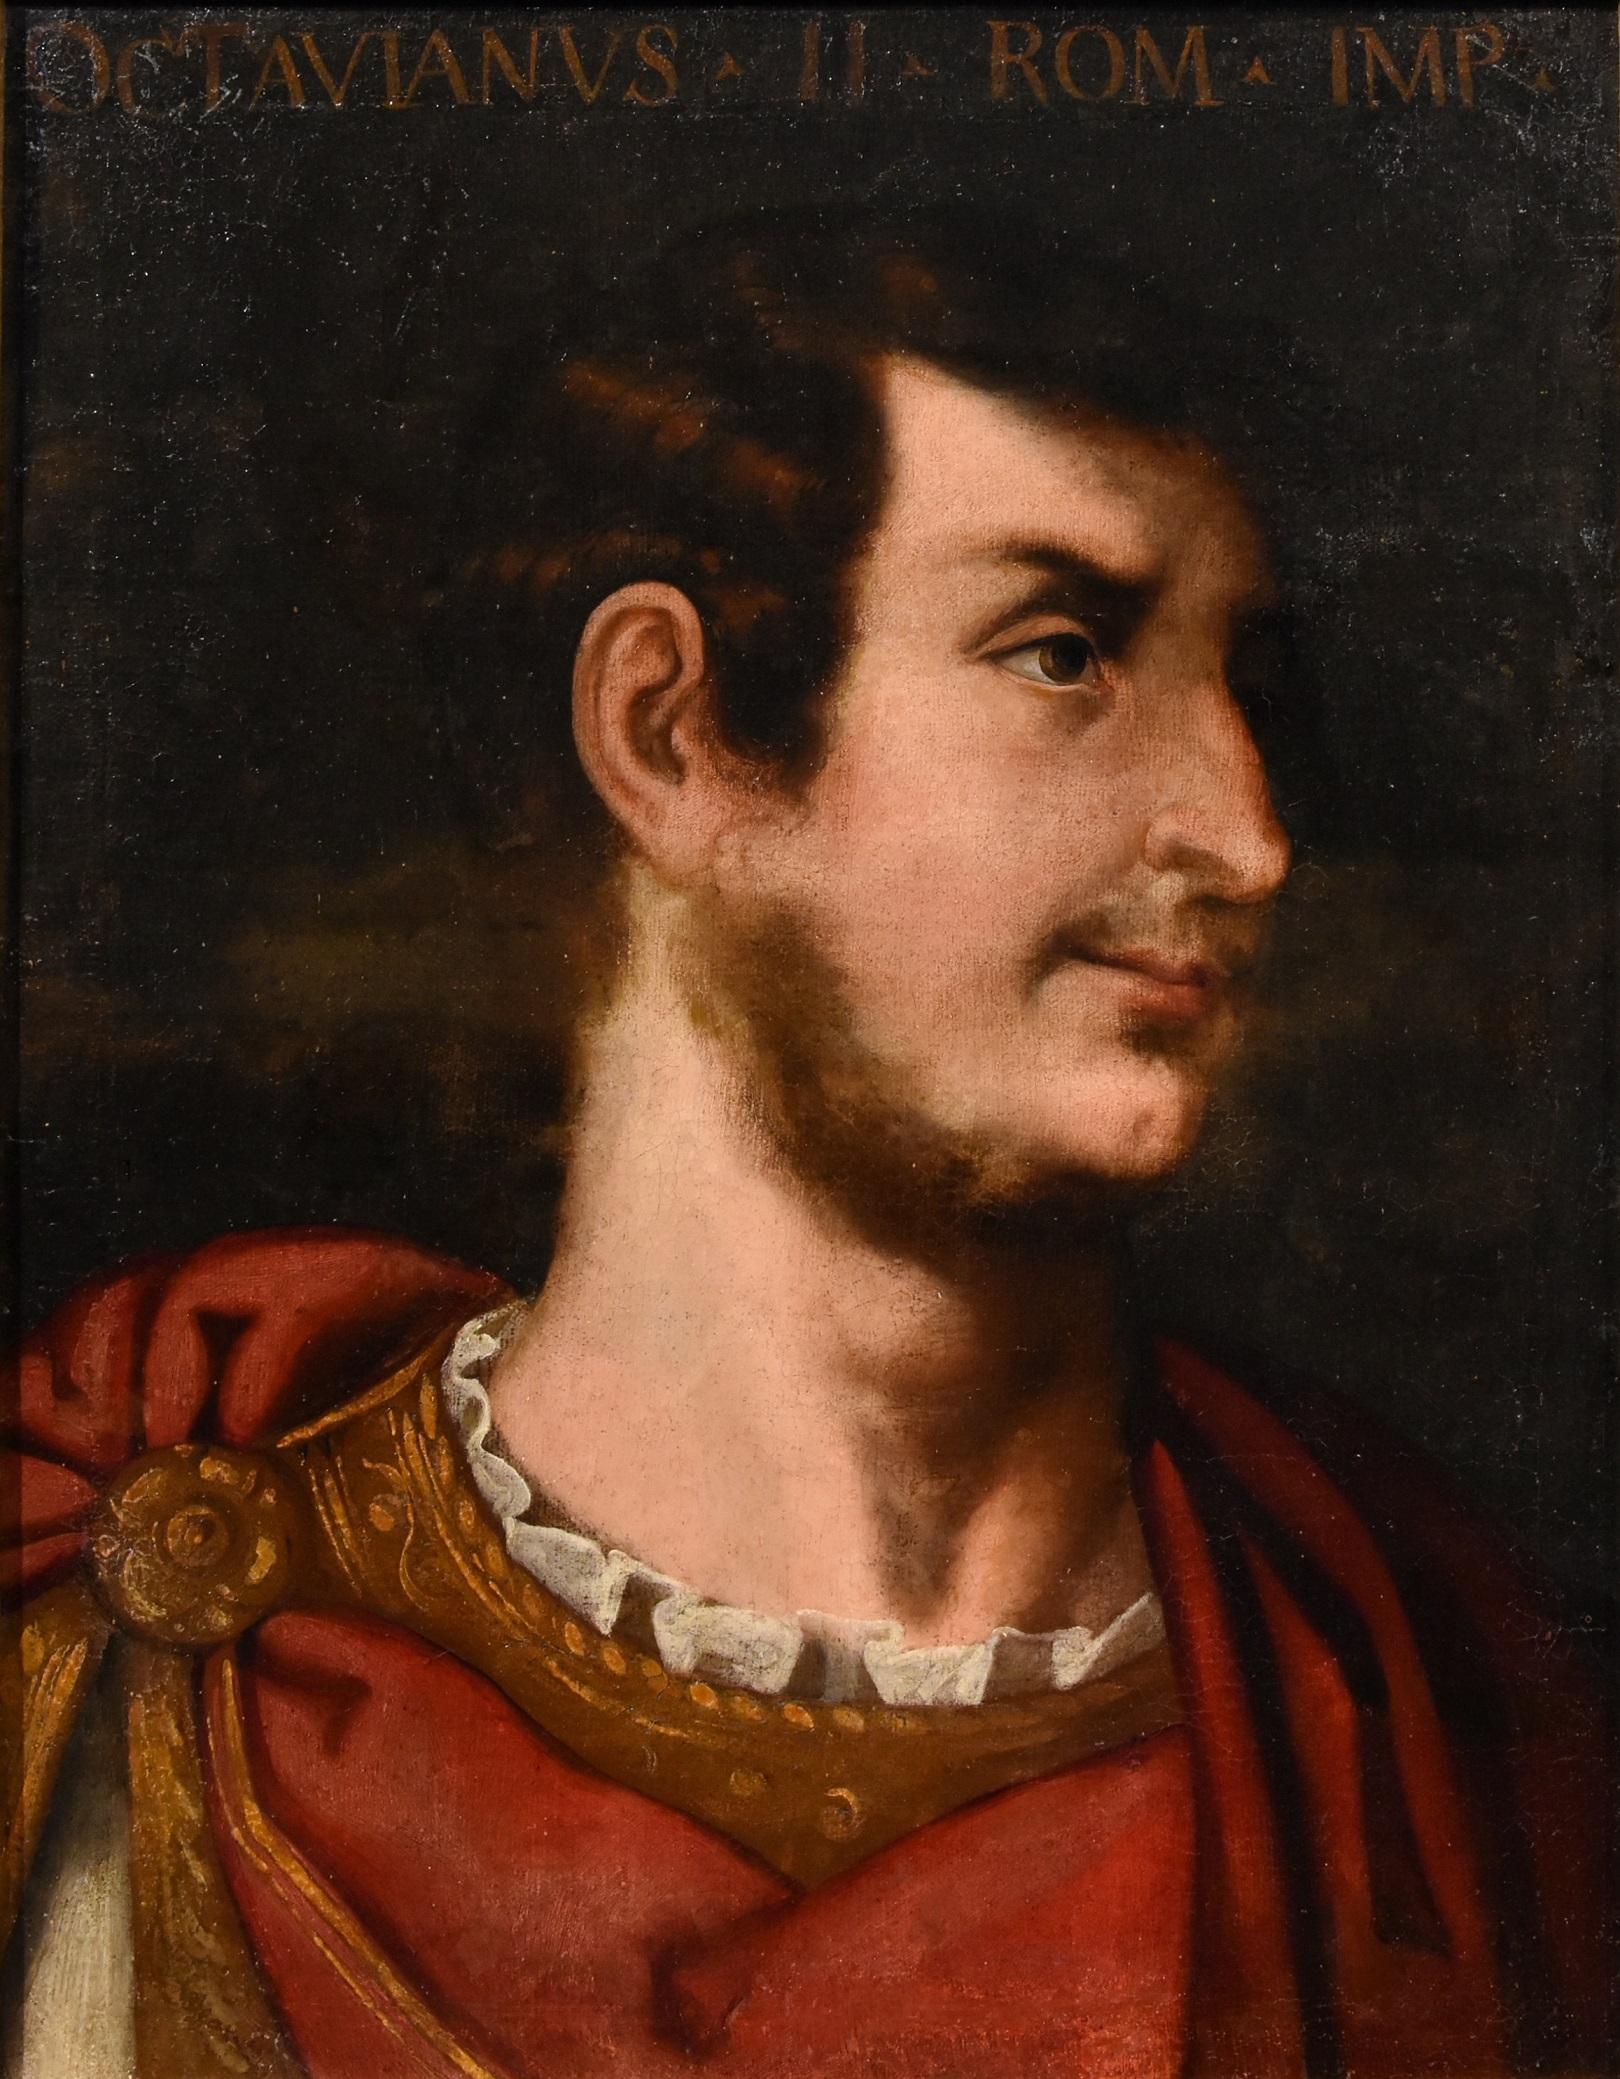 Emperors Caesar Octavian Tiziano Paint Oil on canvas Old master 17/18th Century - Old Masters Painting by Tiziano Vecellio (Pieve di Cadore 1490 - Venice 1576)